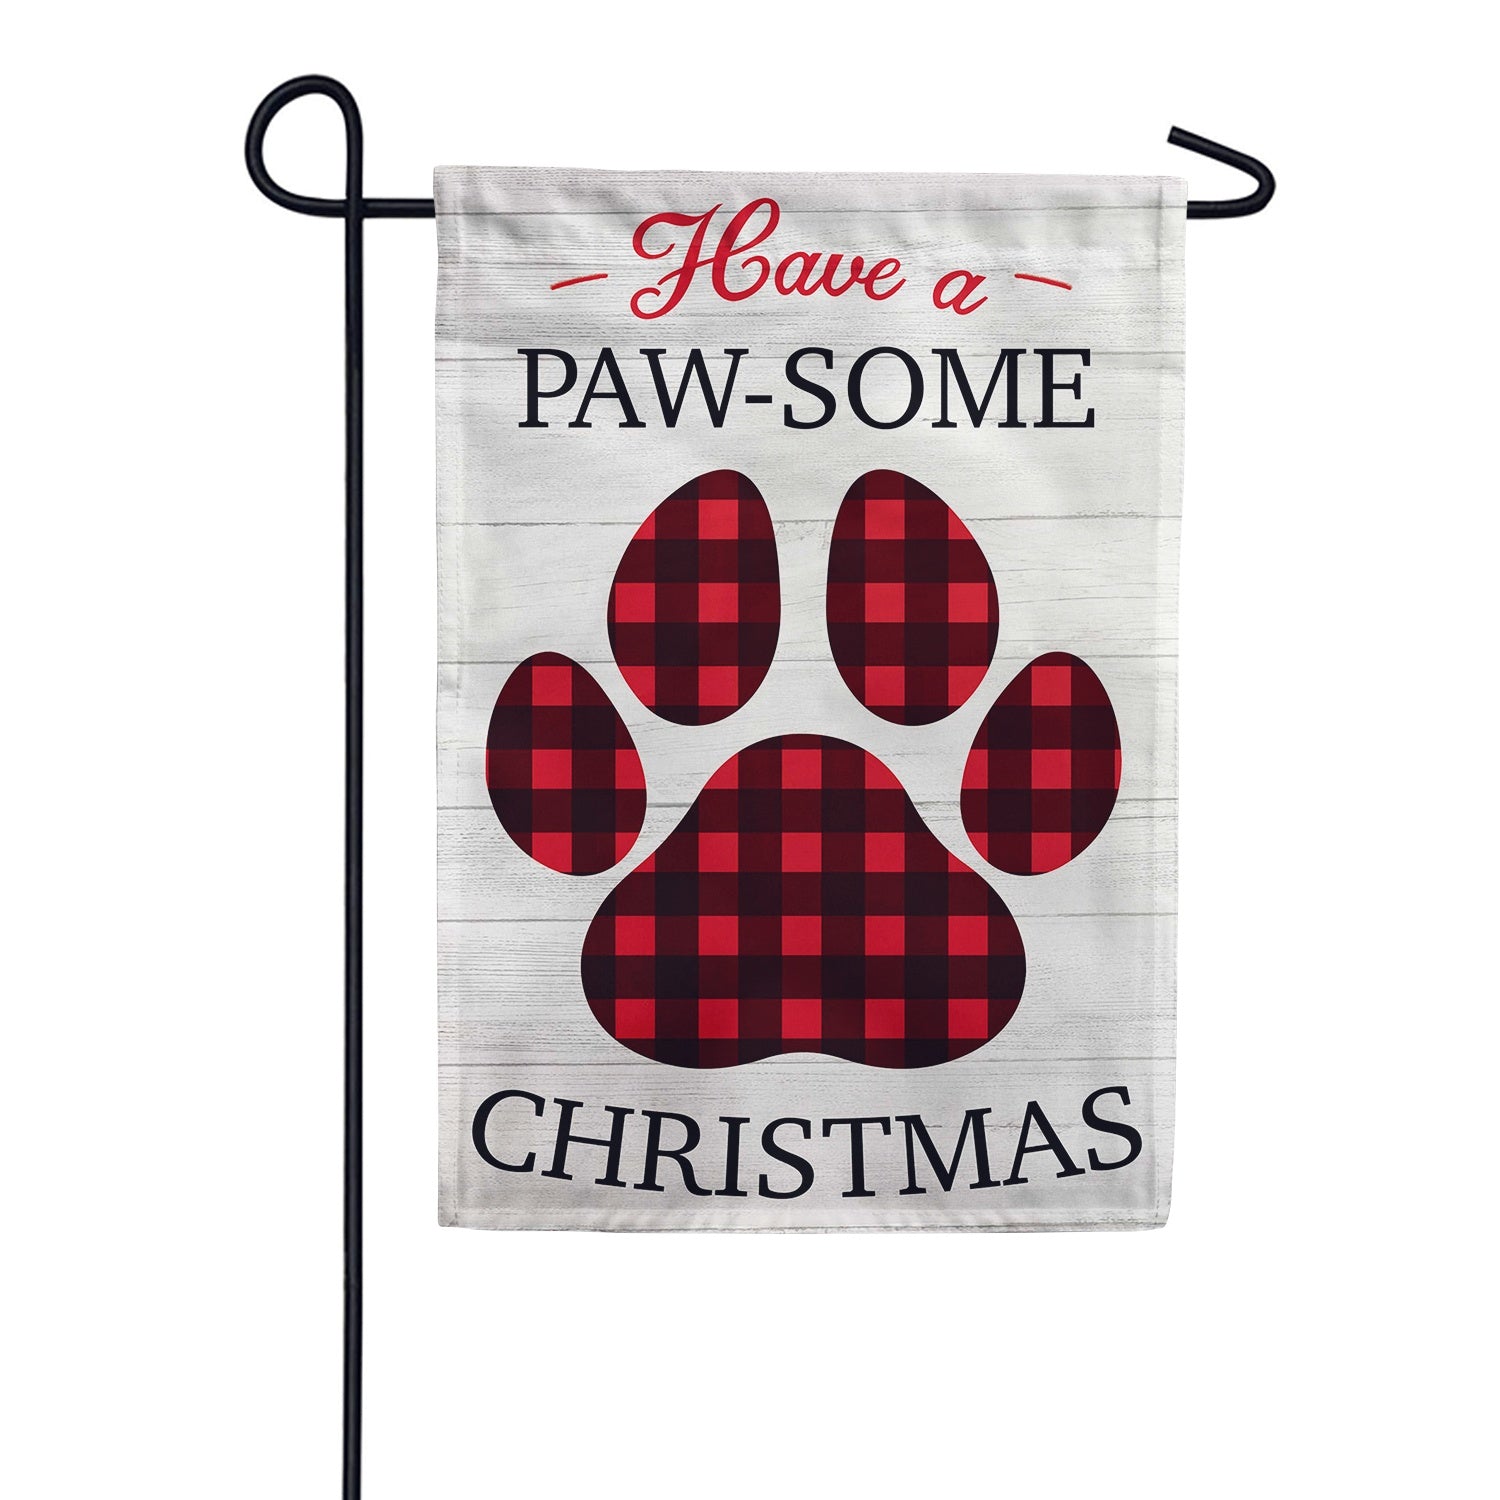 Have a Paw-Some Christmas Burlap Garden Flag